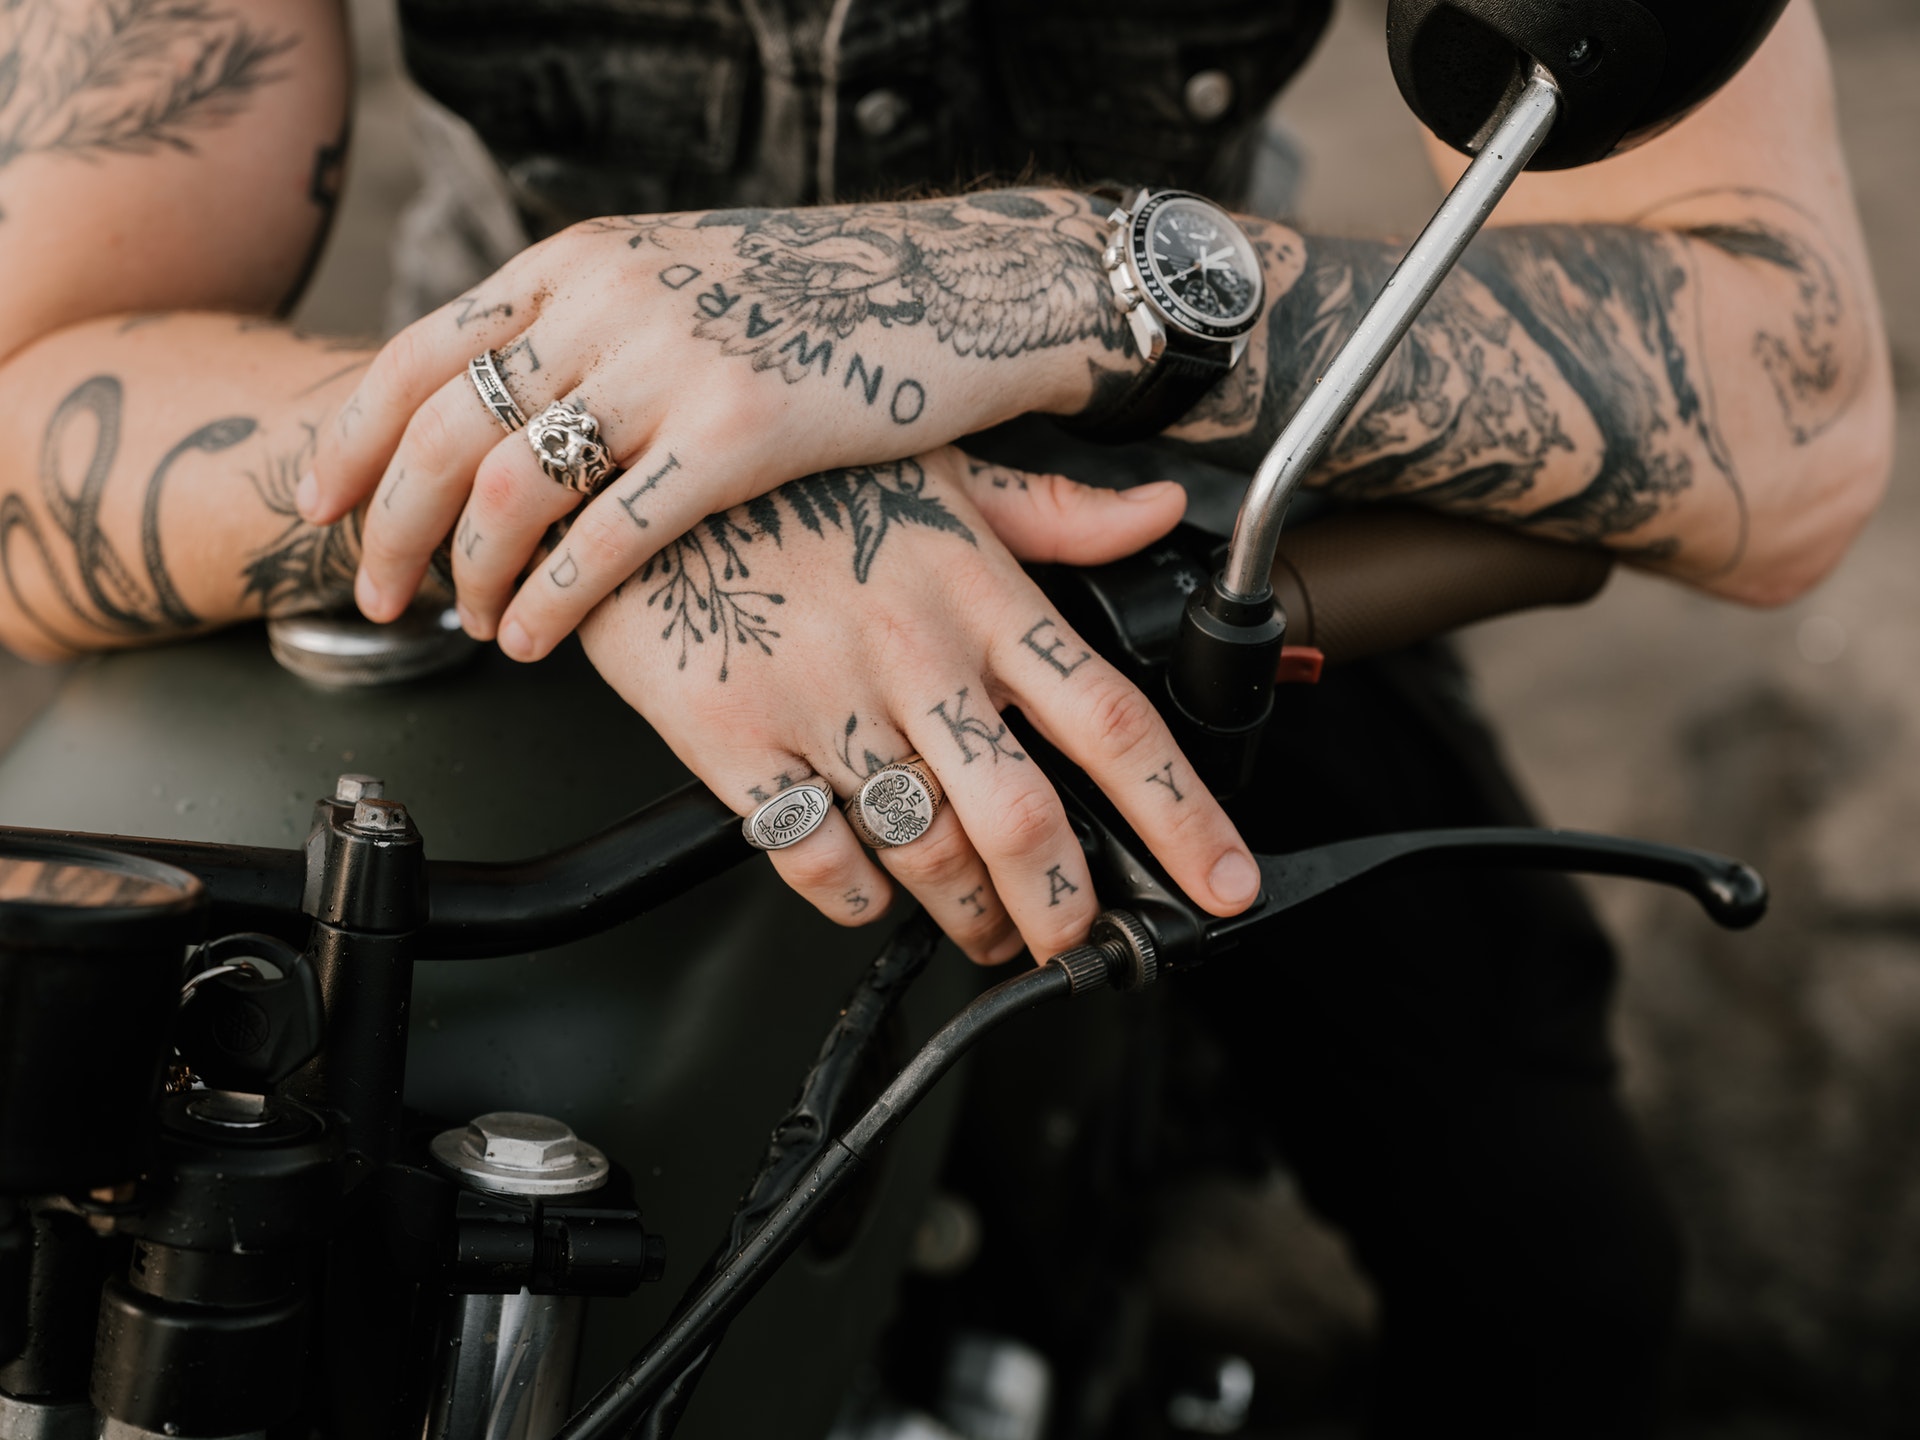 Got ink? The Process And Psychology Of Tattoos - Science World